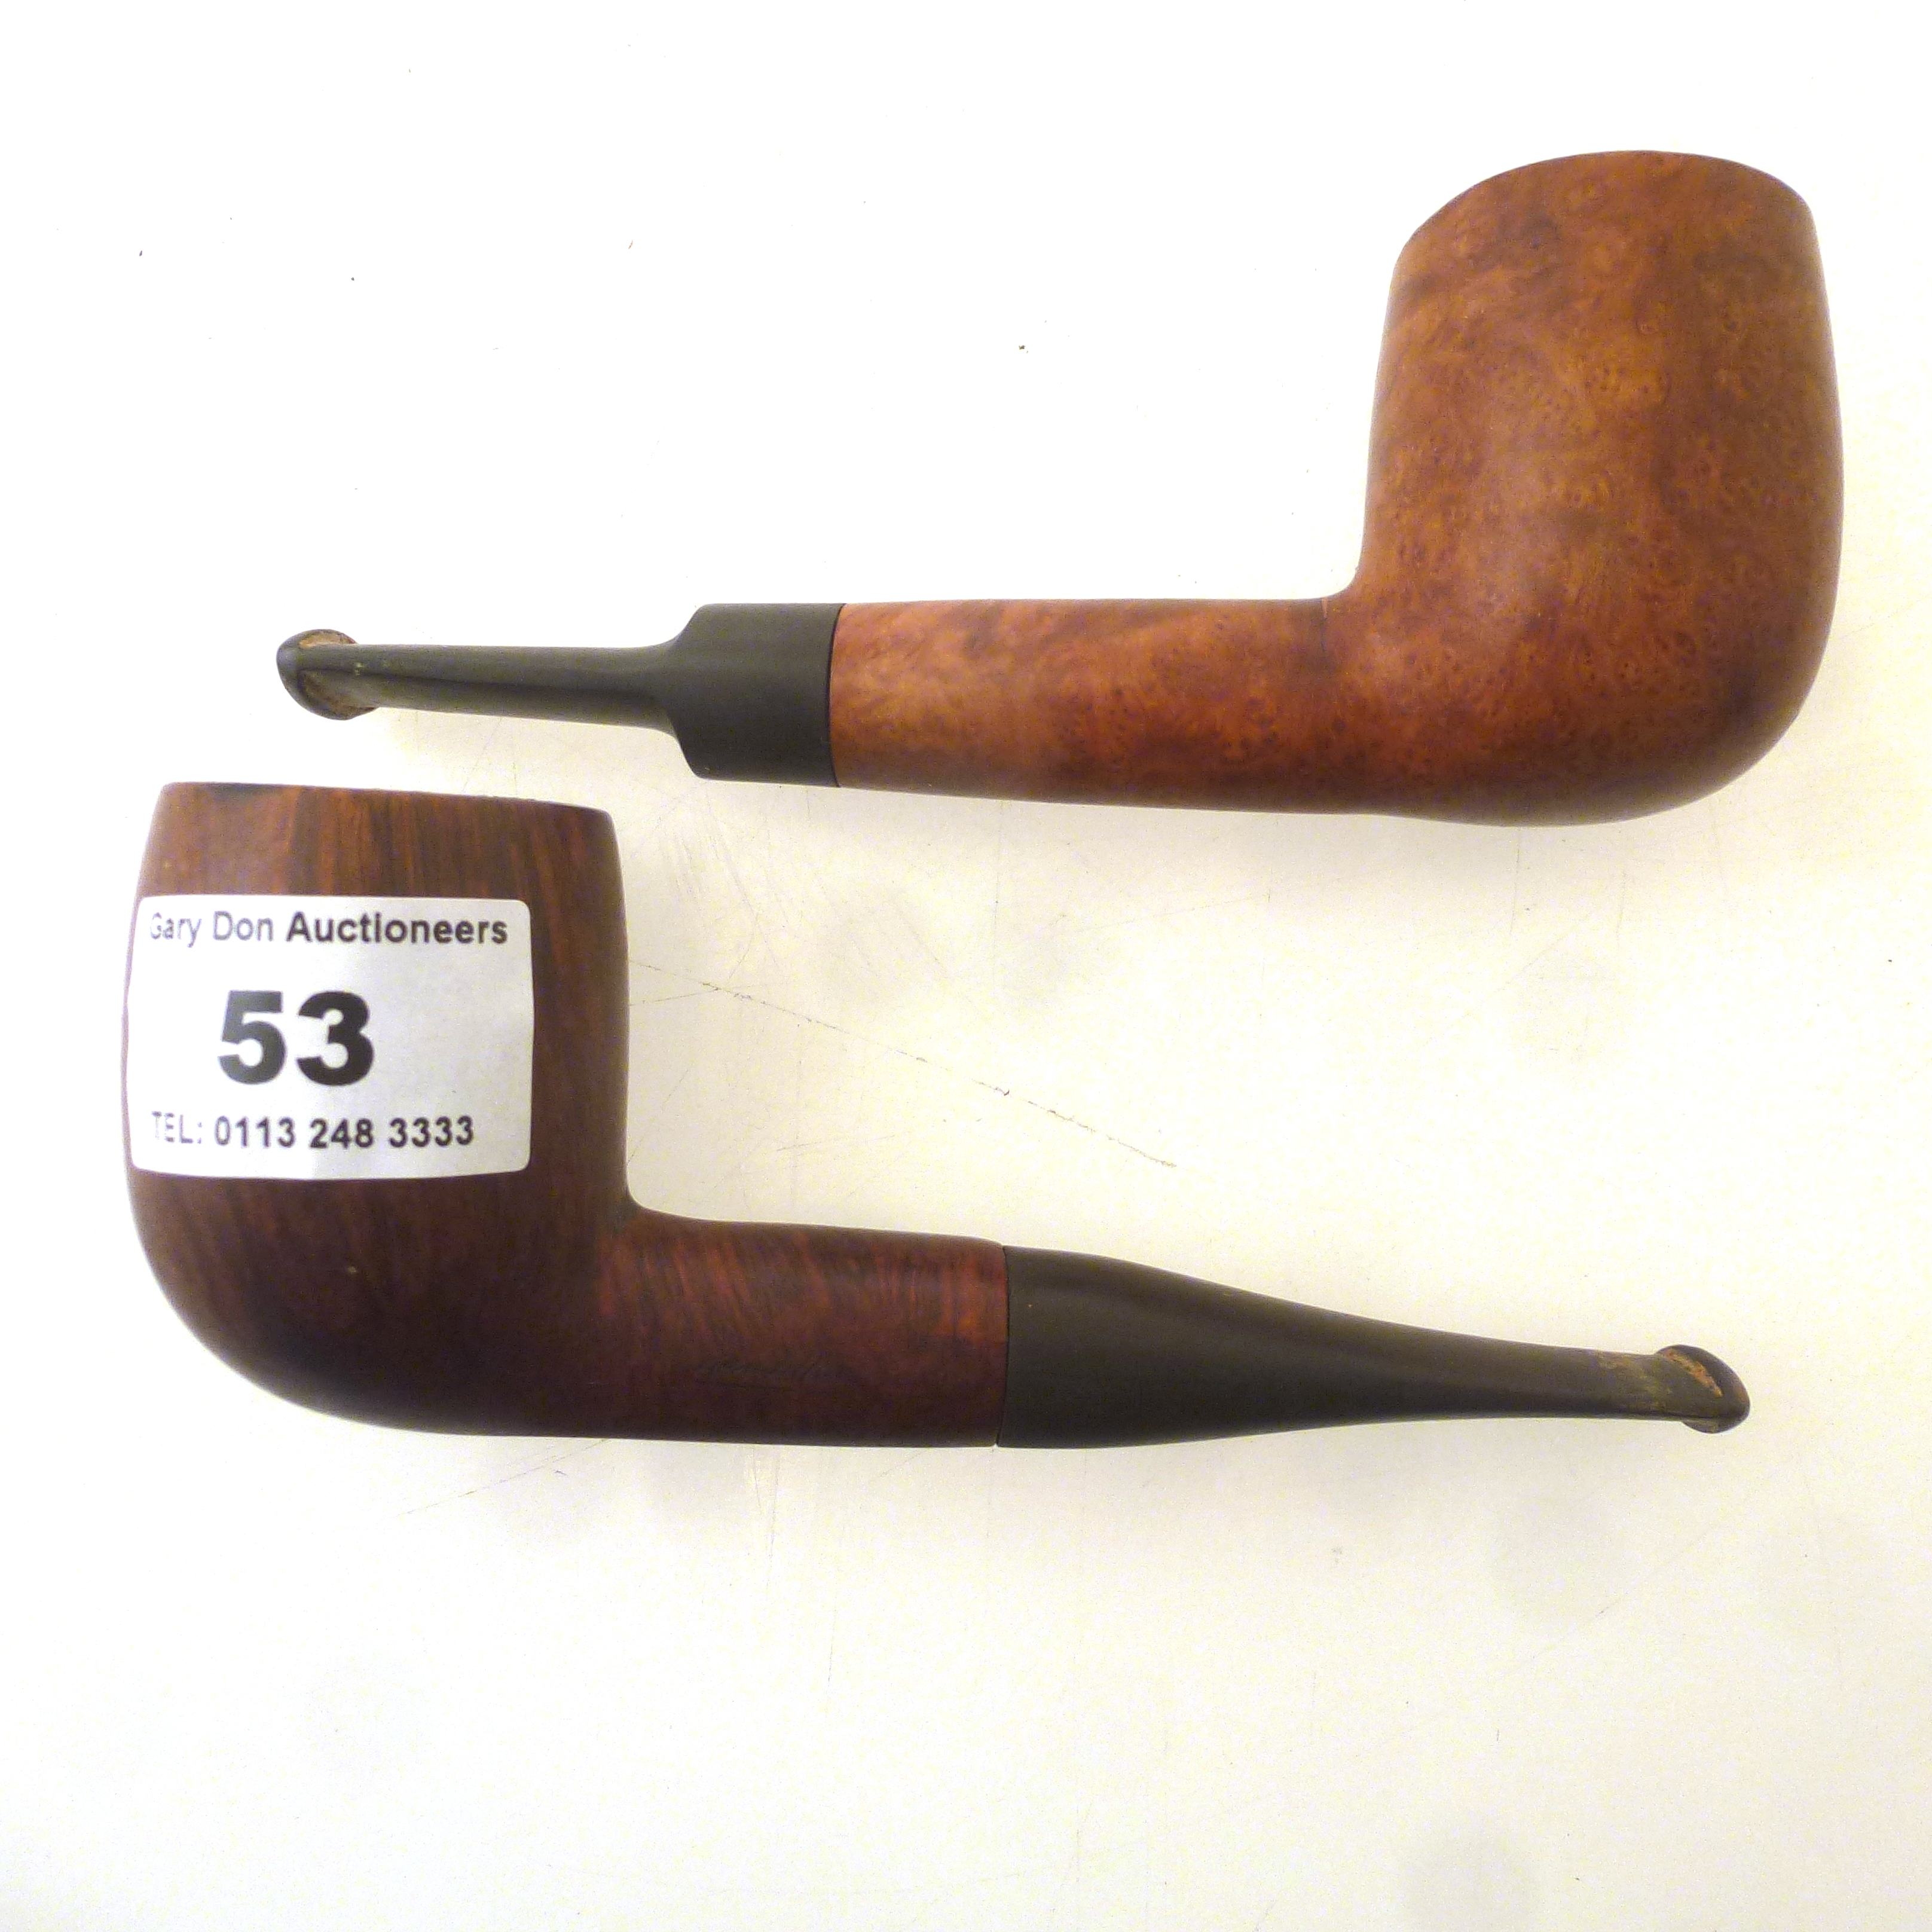 2 PIPES - R. MARTIN BLAKEMAR AND ASTLEYS APPROX L: 5"